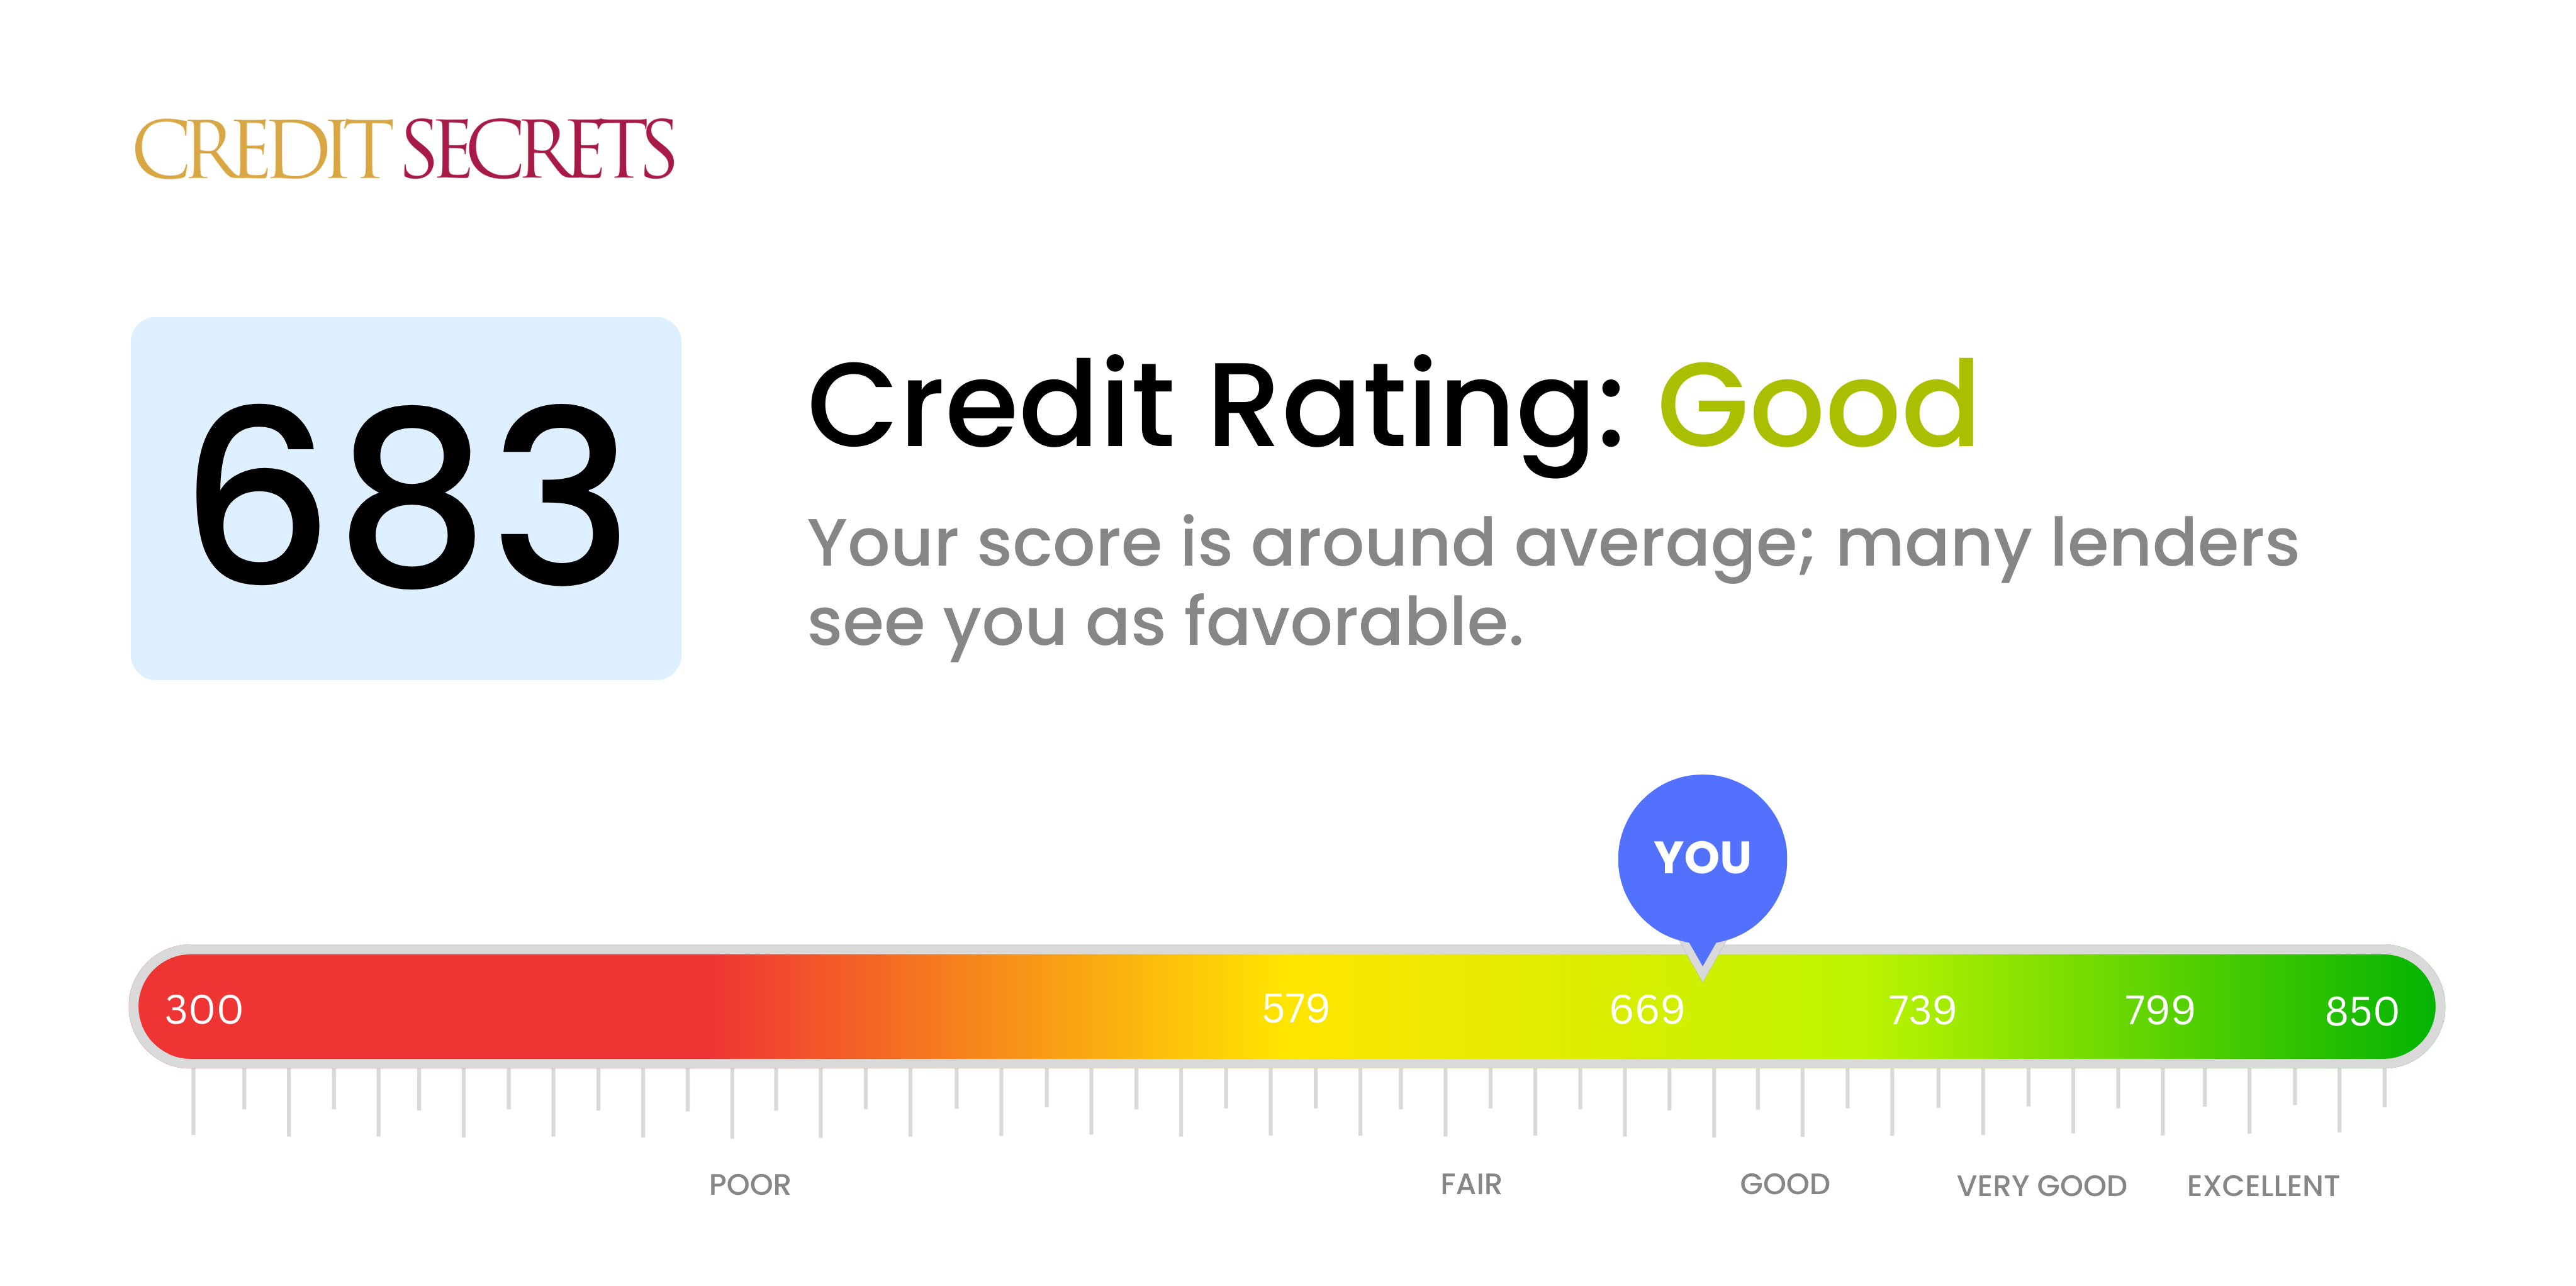 Is 683 a good credit score?